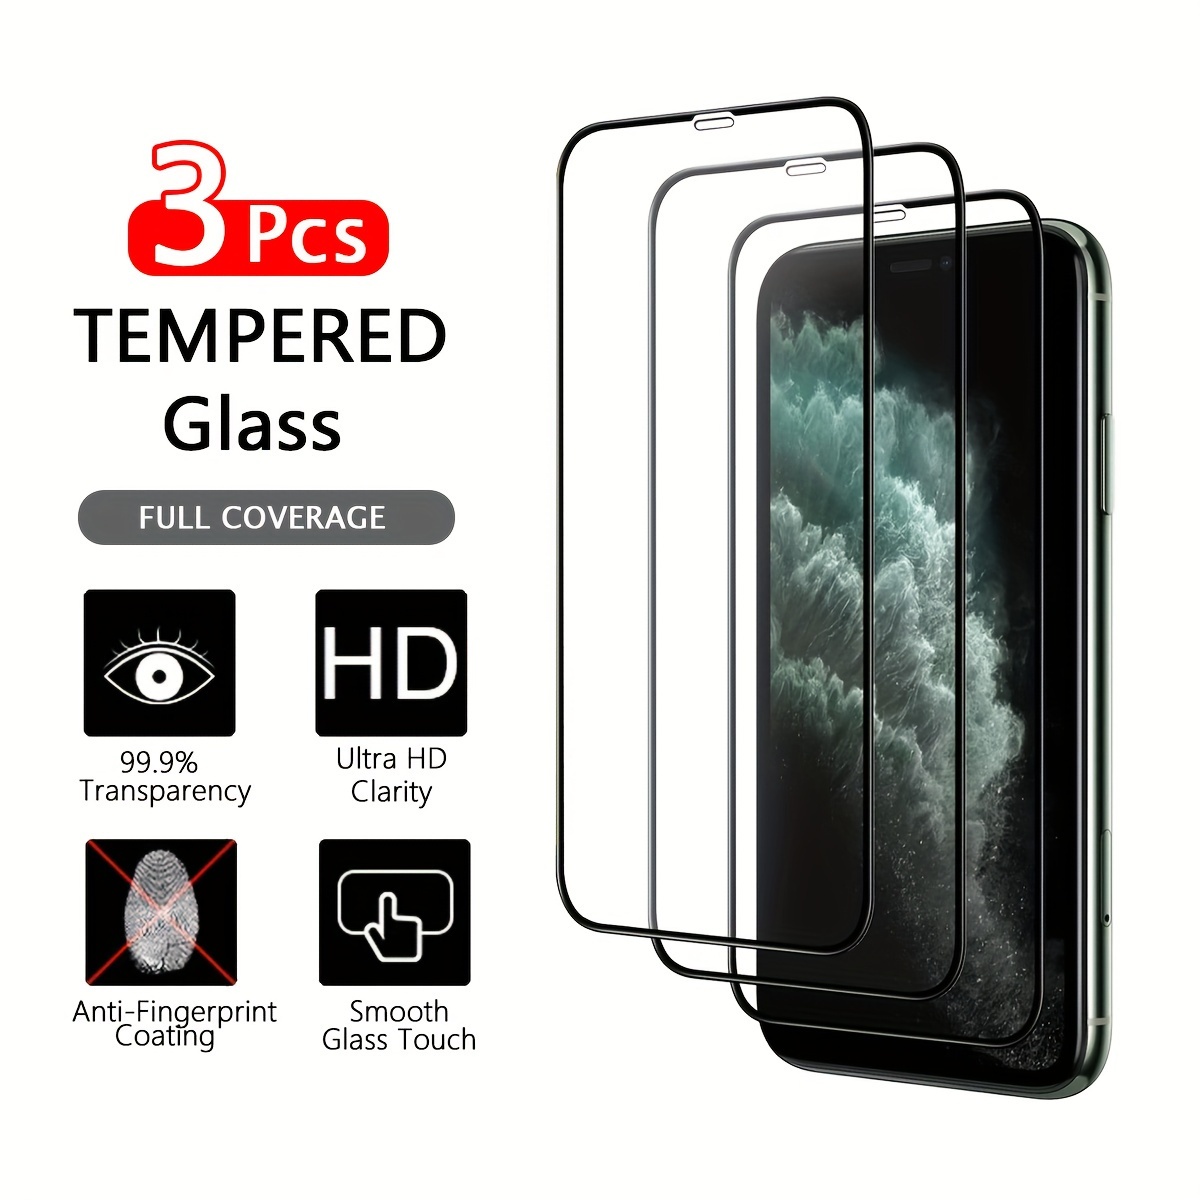 

3-pack Tempered Glass Screen Protector For 11/pro/pro Max, 9h Hardness Hd Clear, Anti-scratch Glossy Surface, Touch Sensitive, Case Friendly